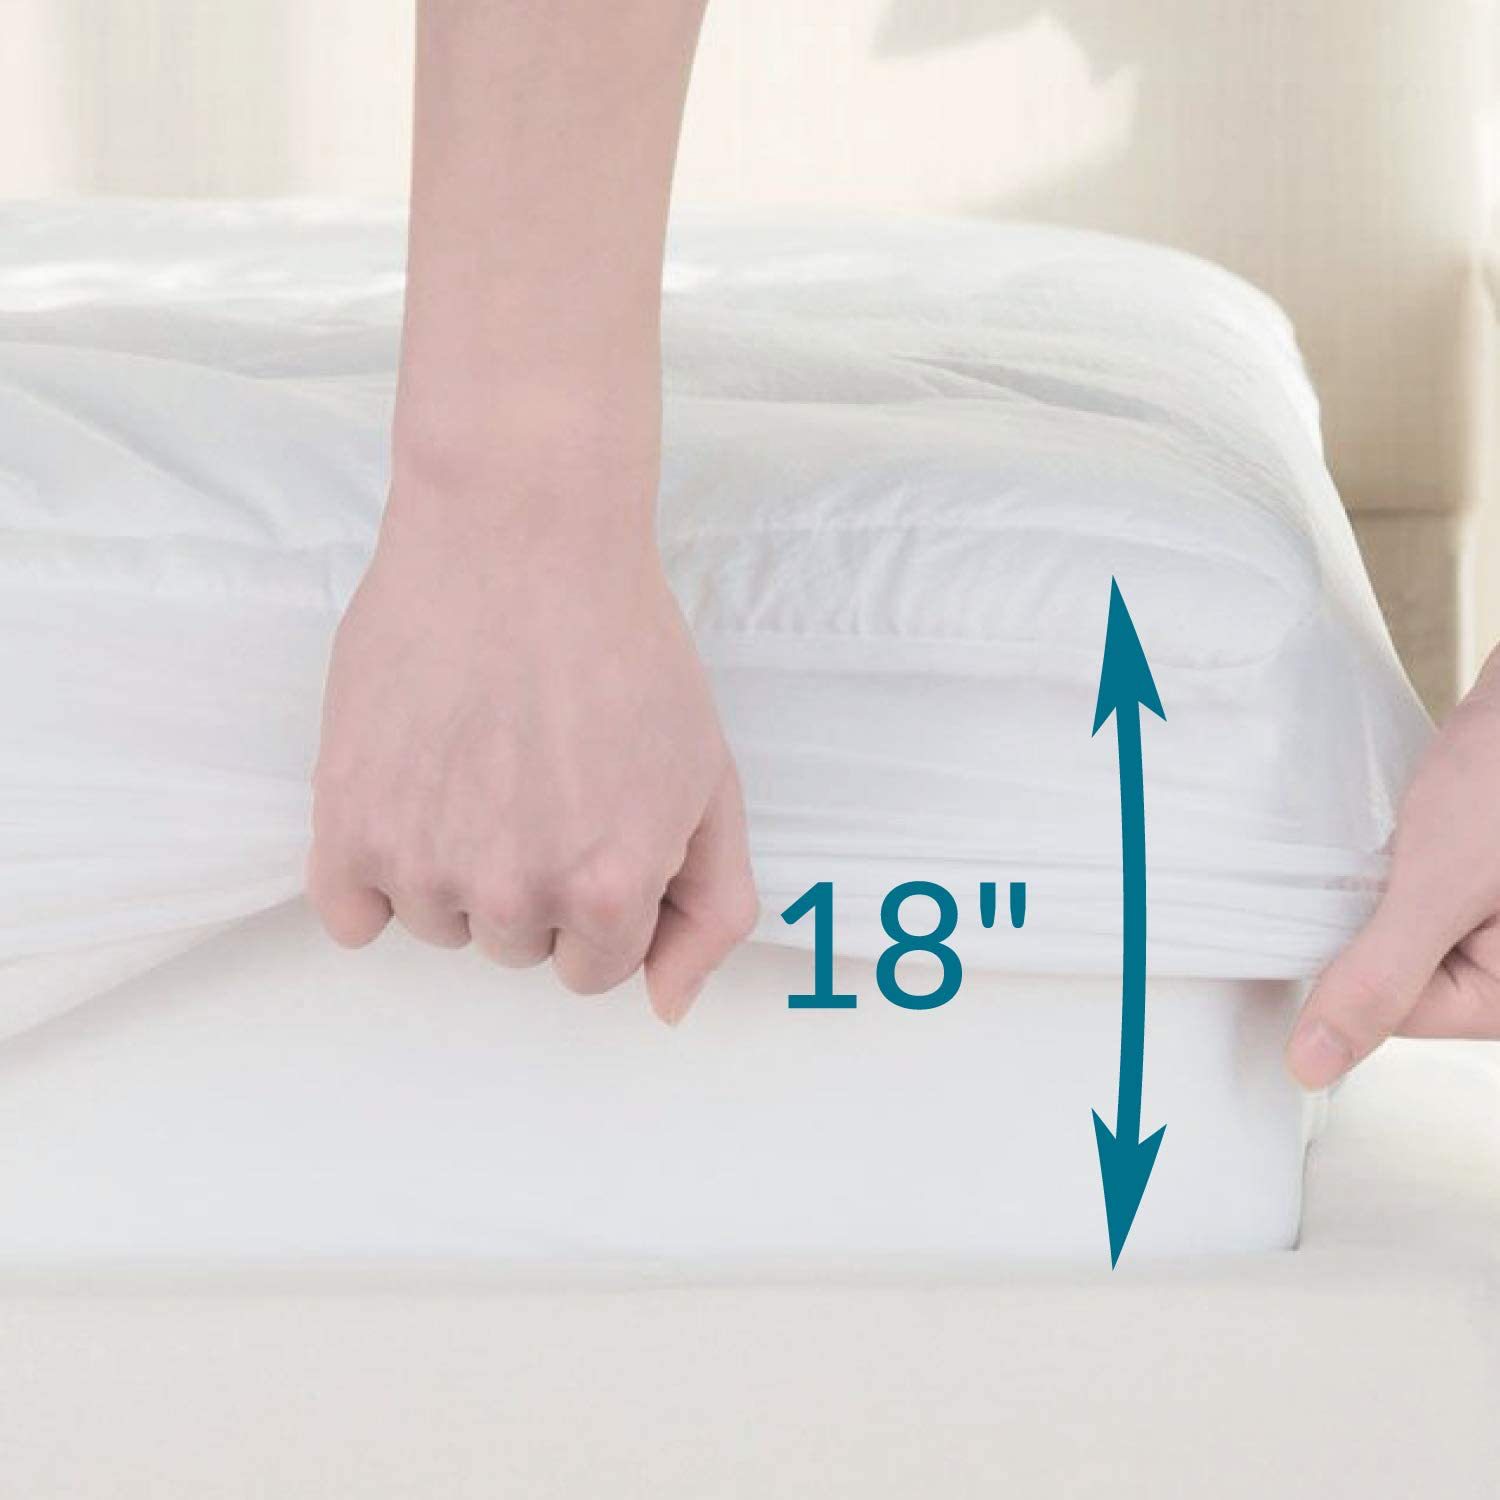 Bedsure Queen Mattress Pad Deep Pocket - Quilted Mattress Cover for Queen Bed PillowTop Mattress Protector, Fitted Sheet Mattress Cover, 60 x 80 inches, White